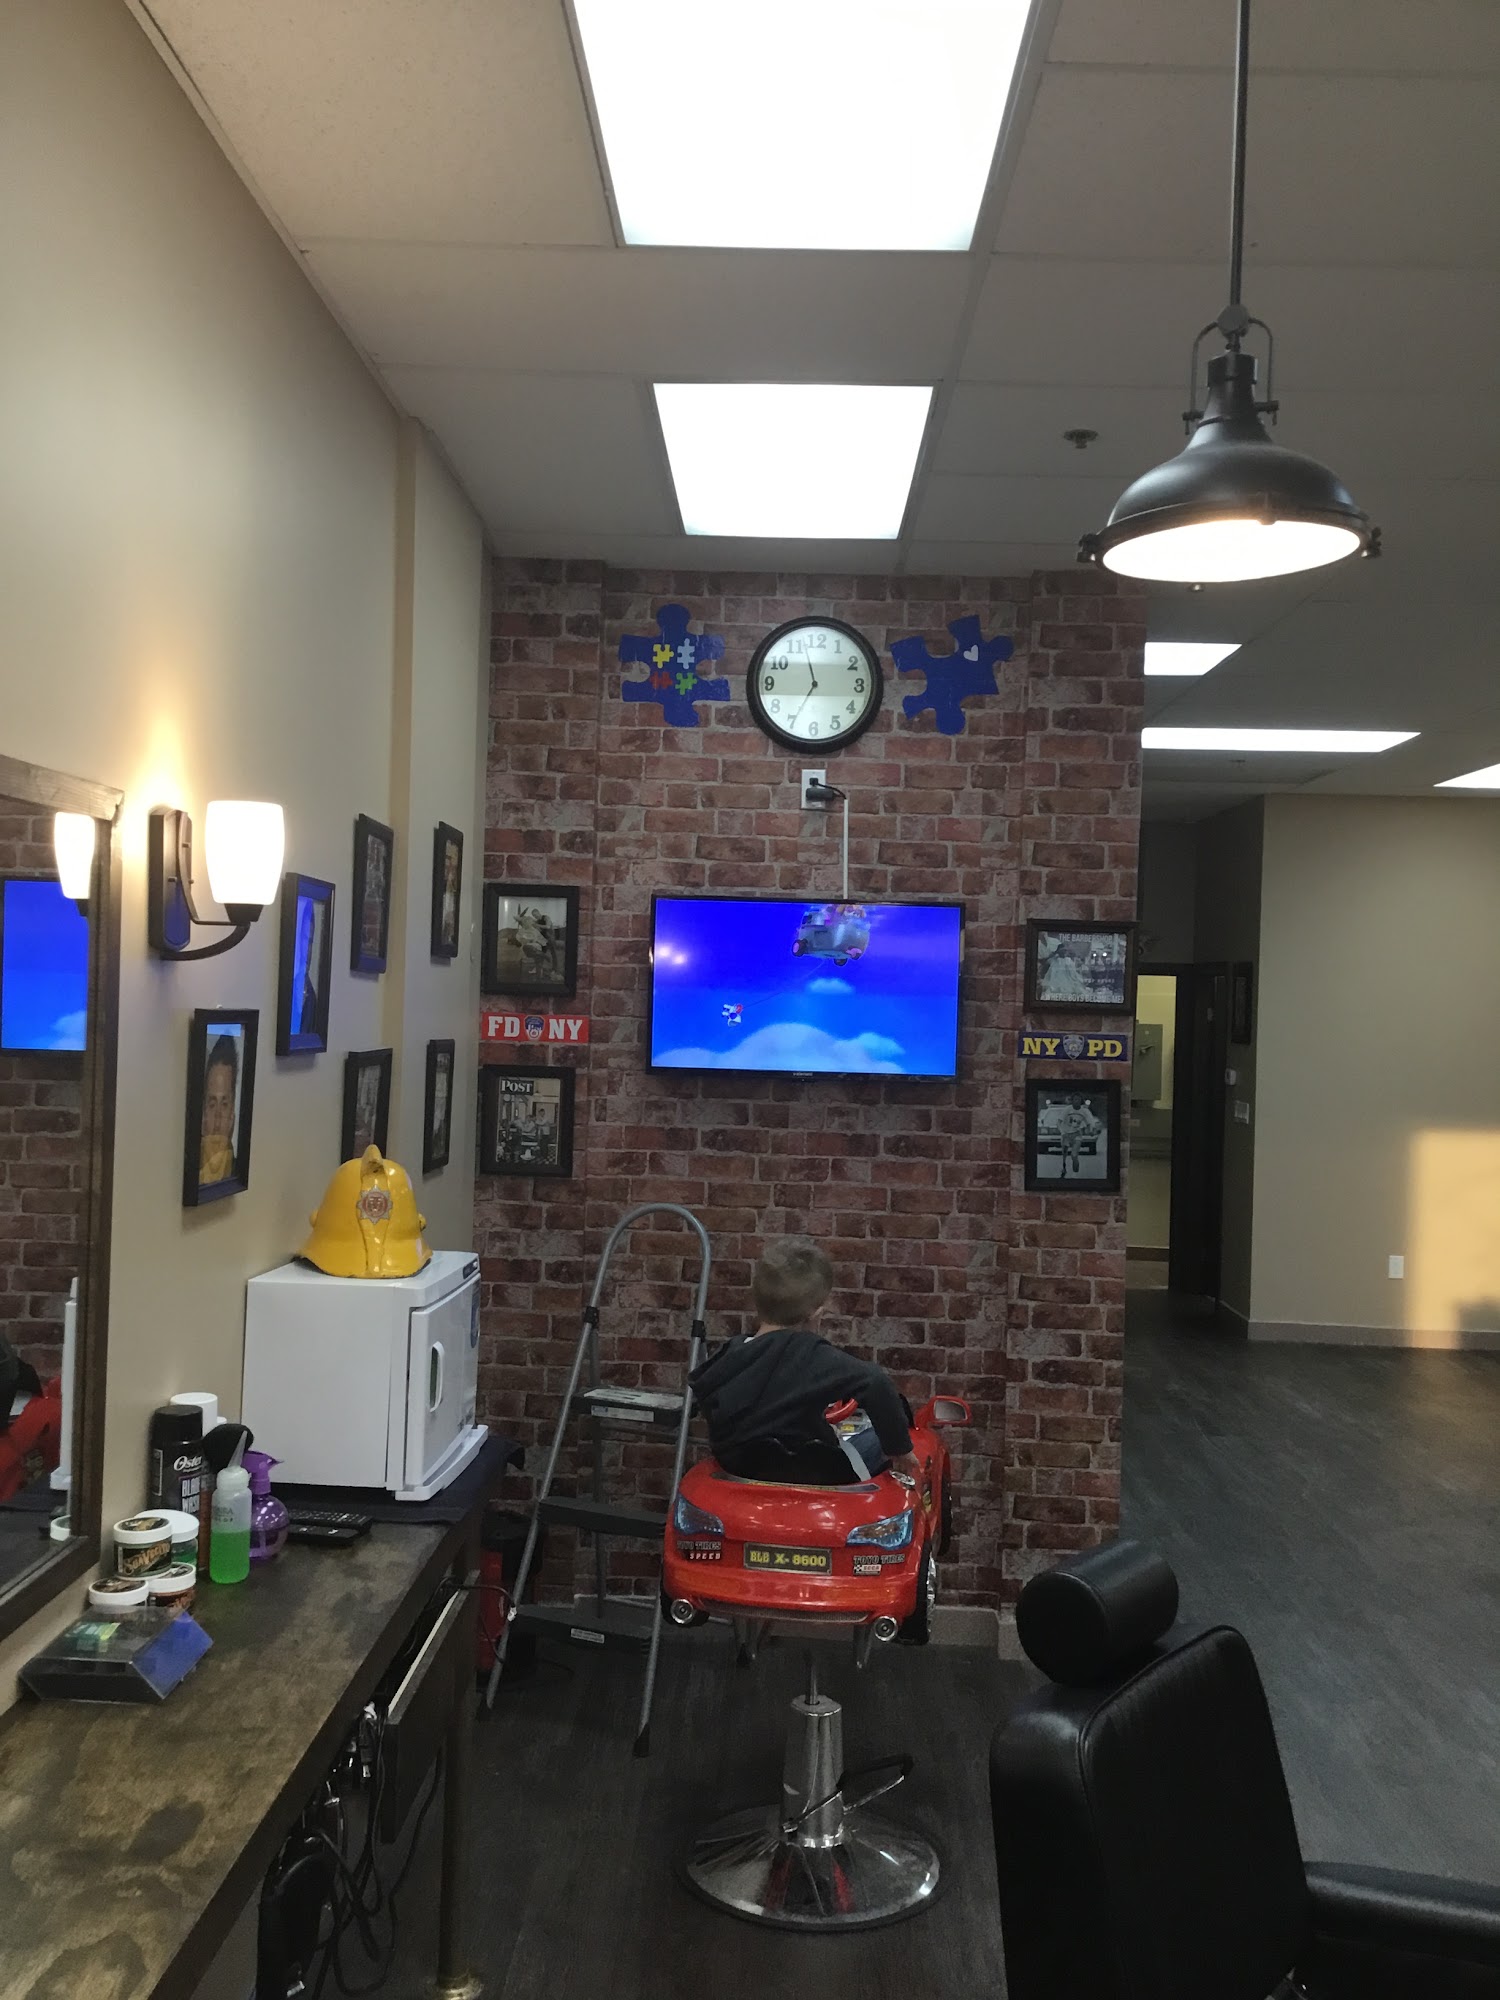 The Kingsmen - Barbers on King 15-1414 Durham Regional Hwy 2, Courtice Ontario L1E 3B4